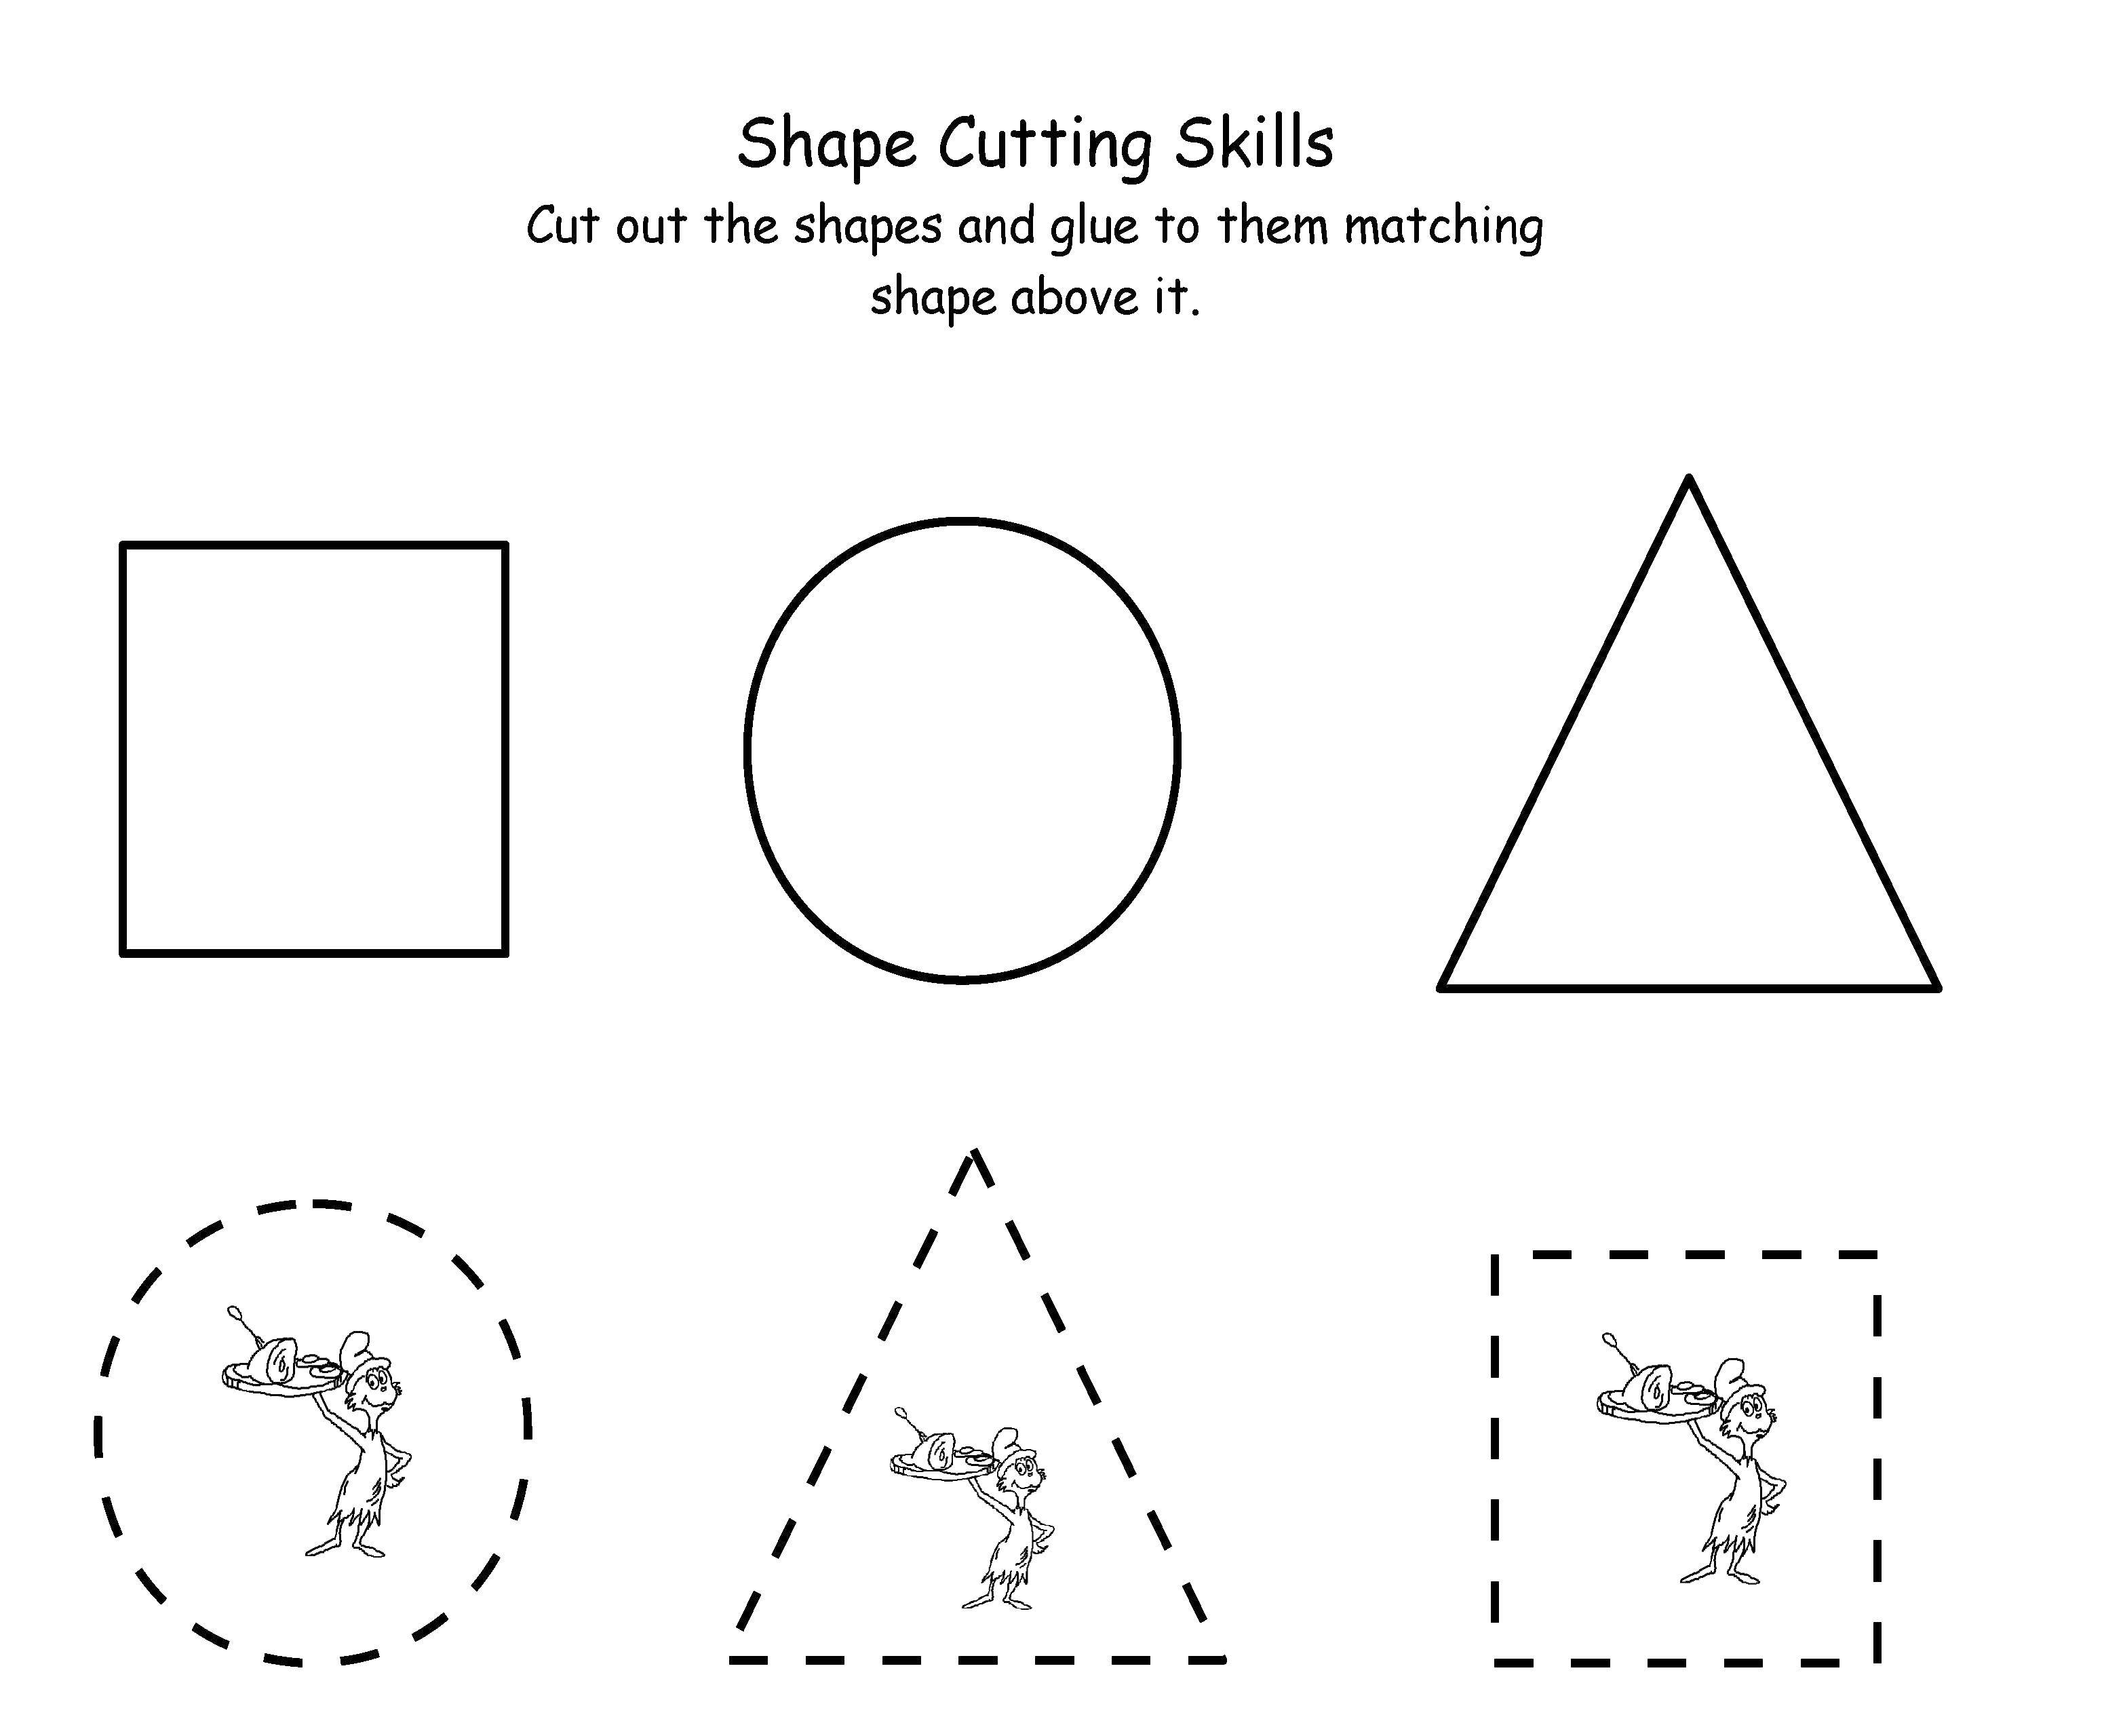 Coloring Shapes for cutting out. Category Templates for cutting out. Tags:  patterns, contours, shapes.